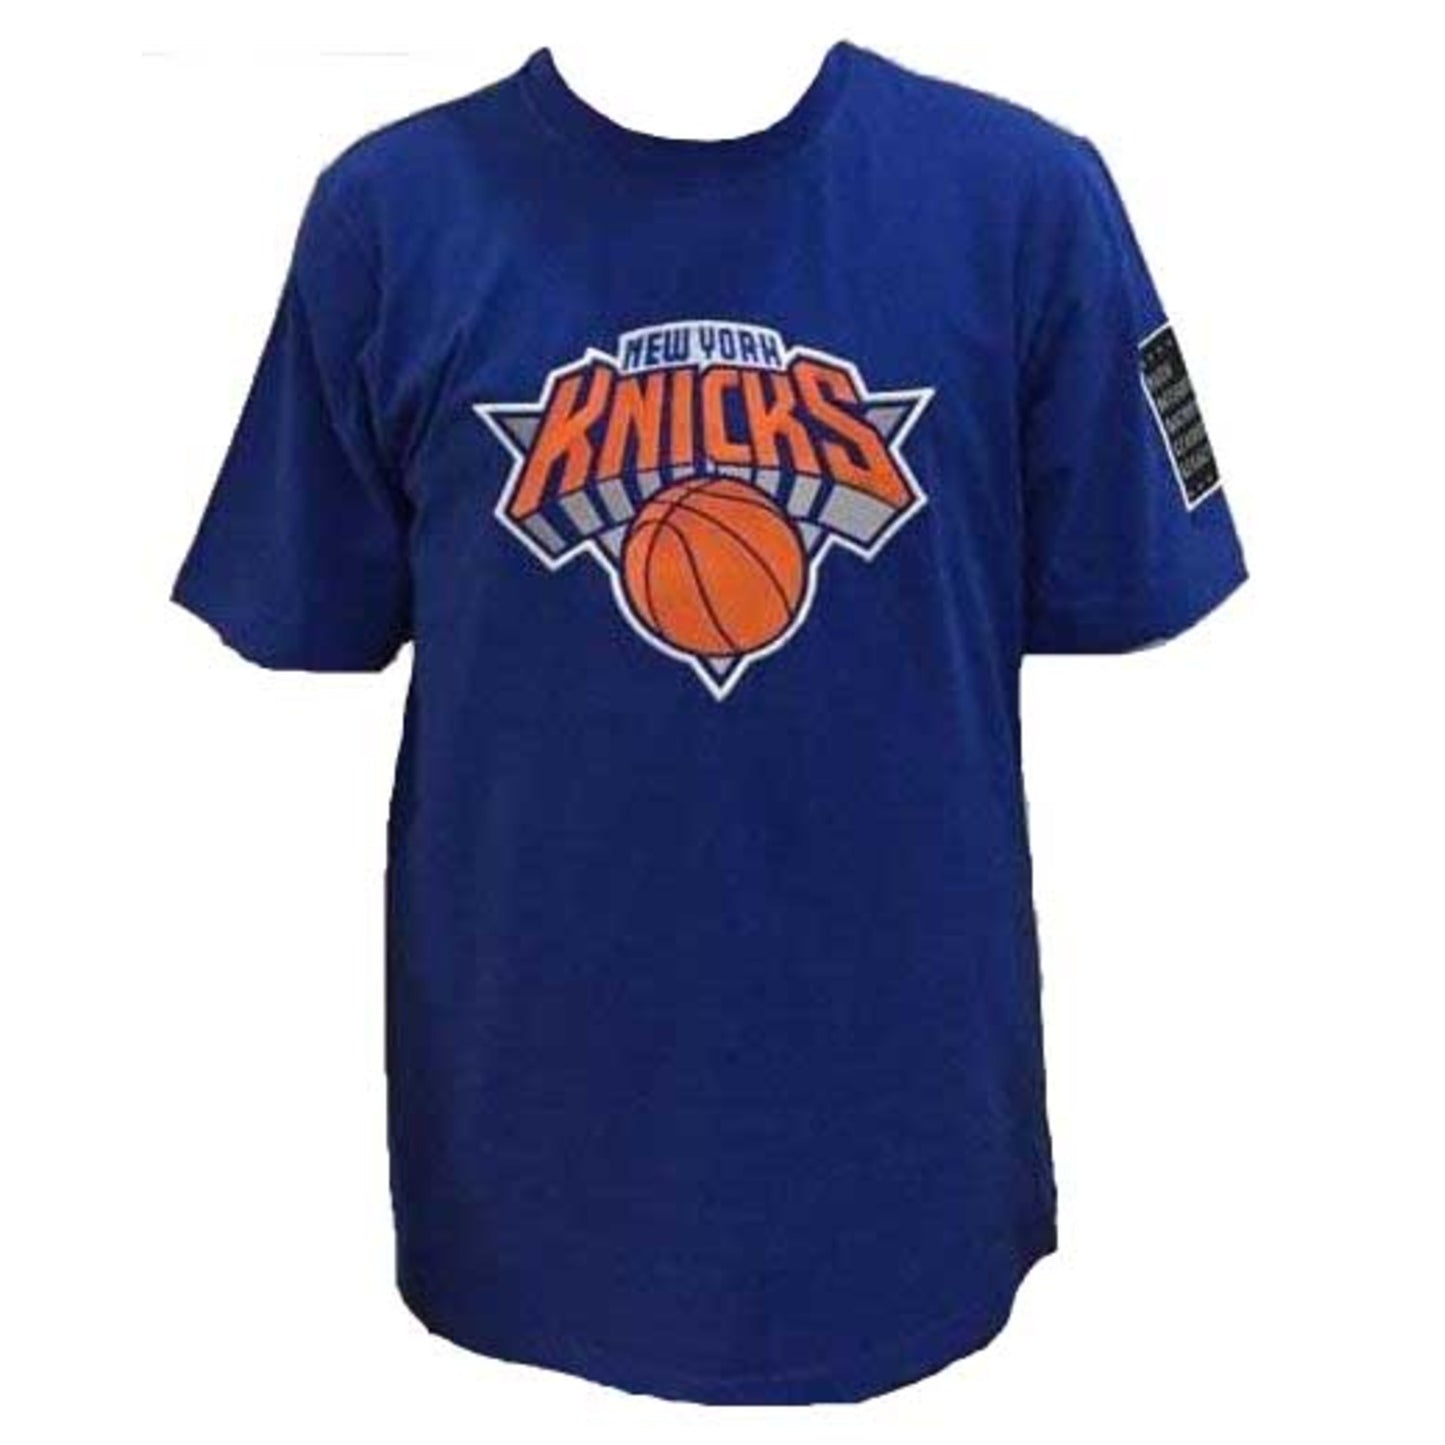 FISLL Knicks Black History Collection Tee - Front View